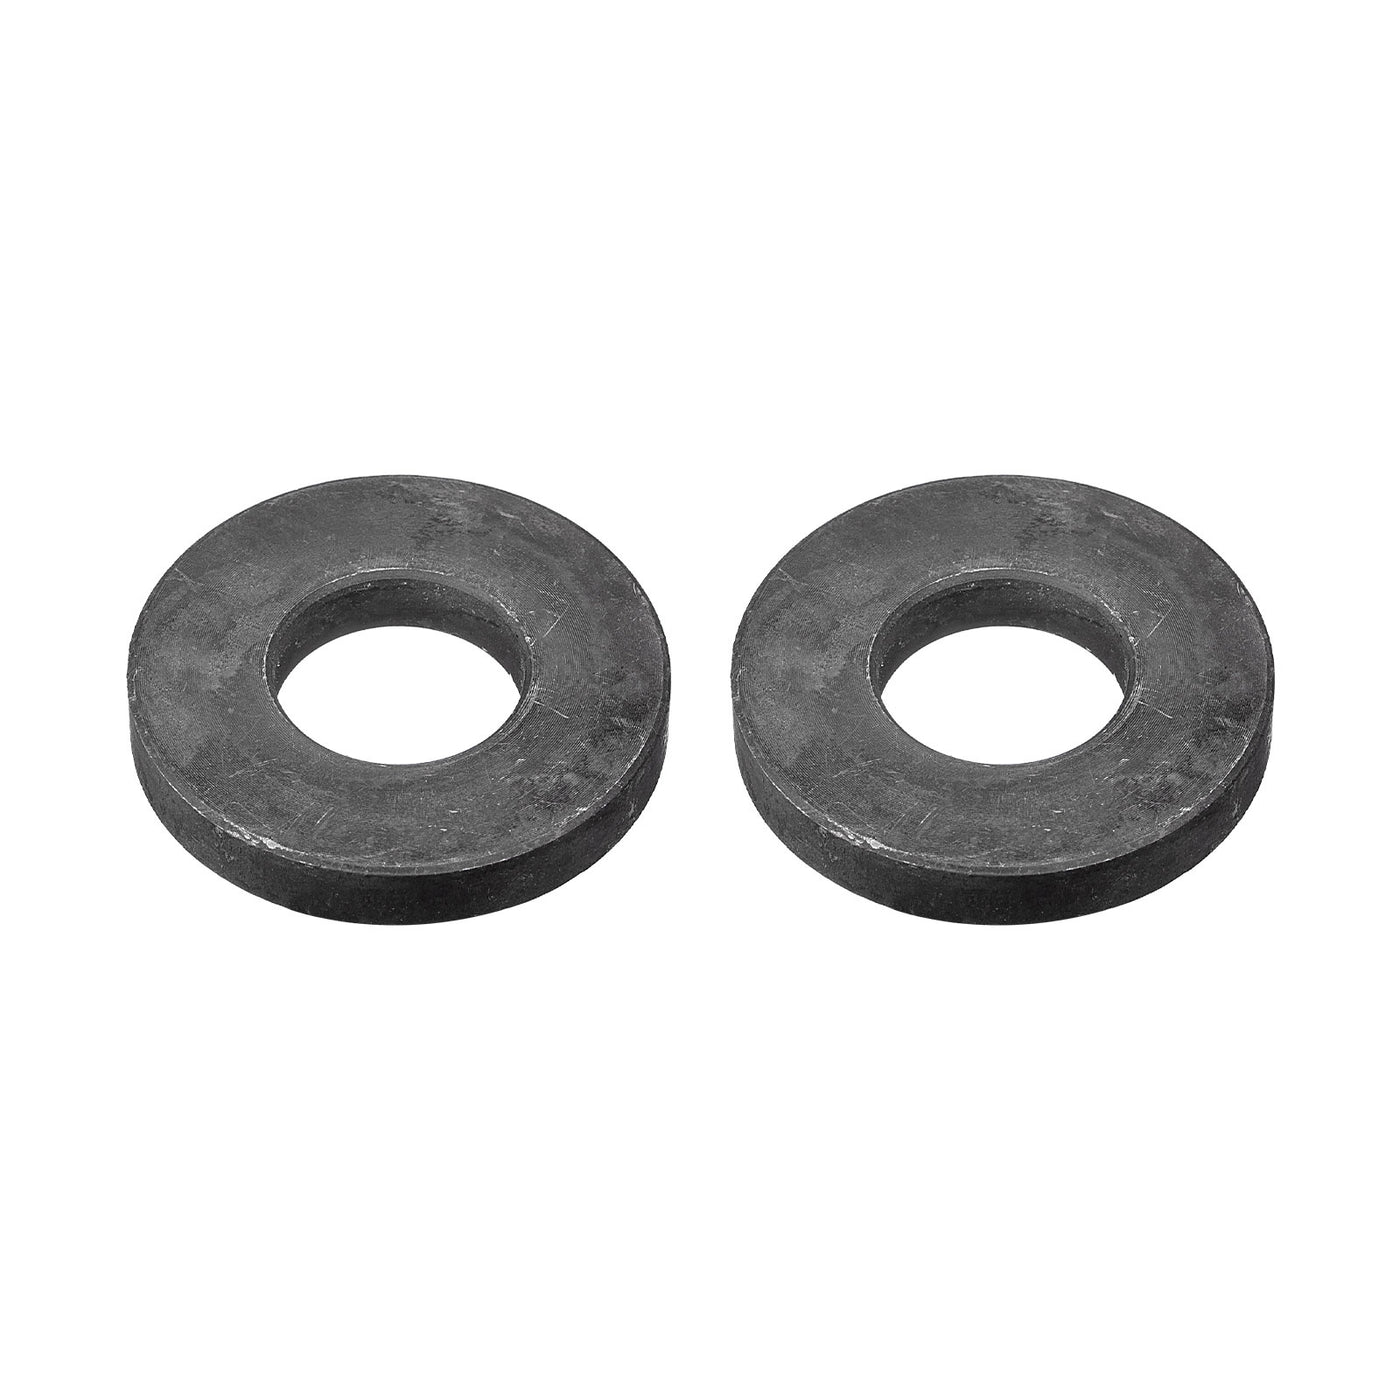 uxcell Uxcell M24 Carbon Steel Flat Washer 2pcs 24x52x8mm Grade 8.8 Alloy Steel Fasteners